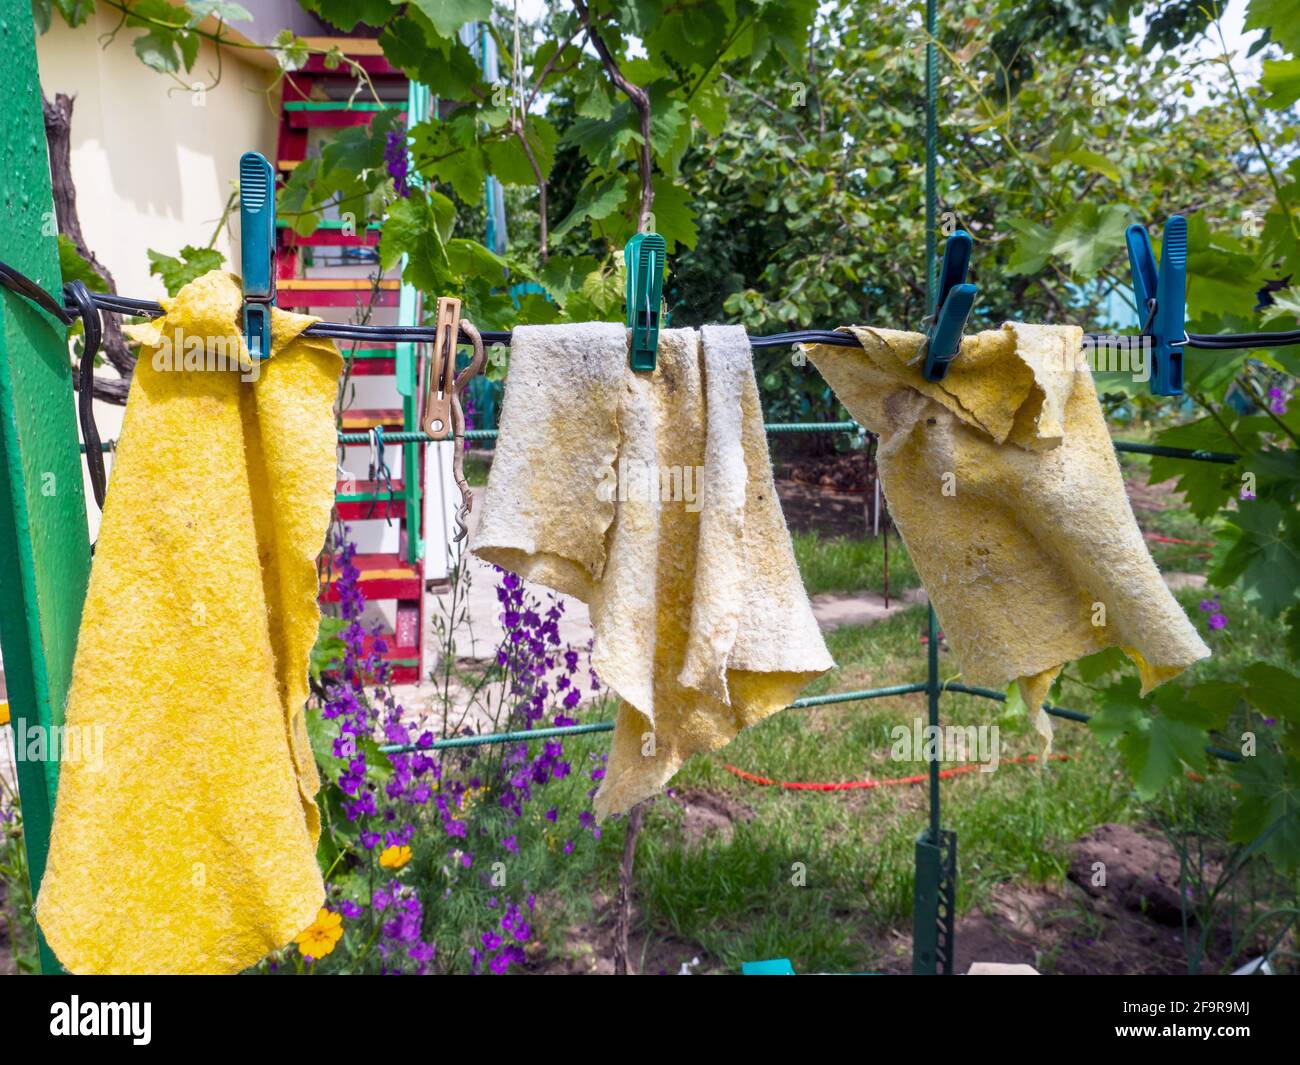 Yellow wet cleaning rags drying while hanging on a wire fixed with clothes pins at the yard outdoors. Rural background, simple life home concept. Stock Photo